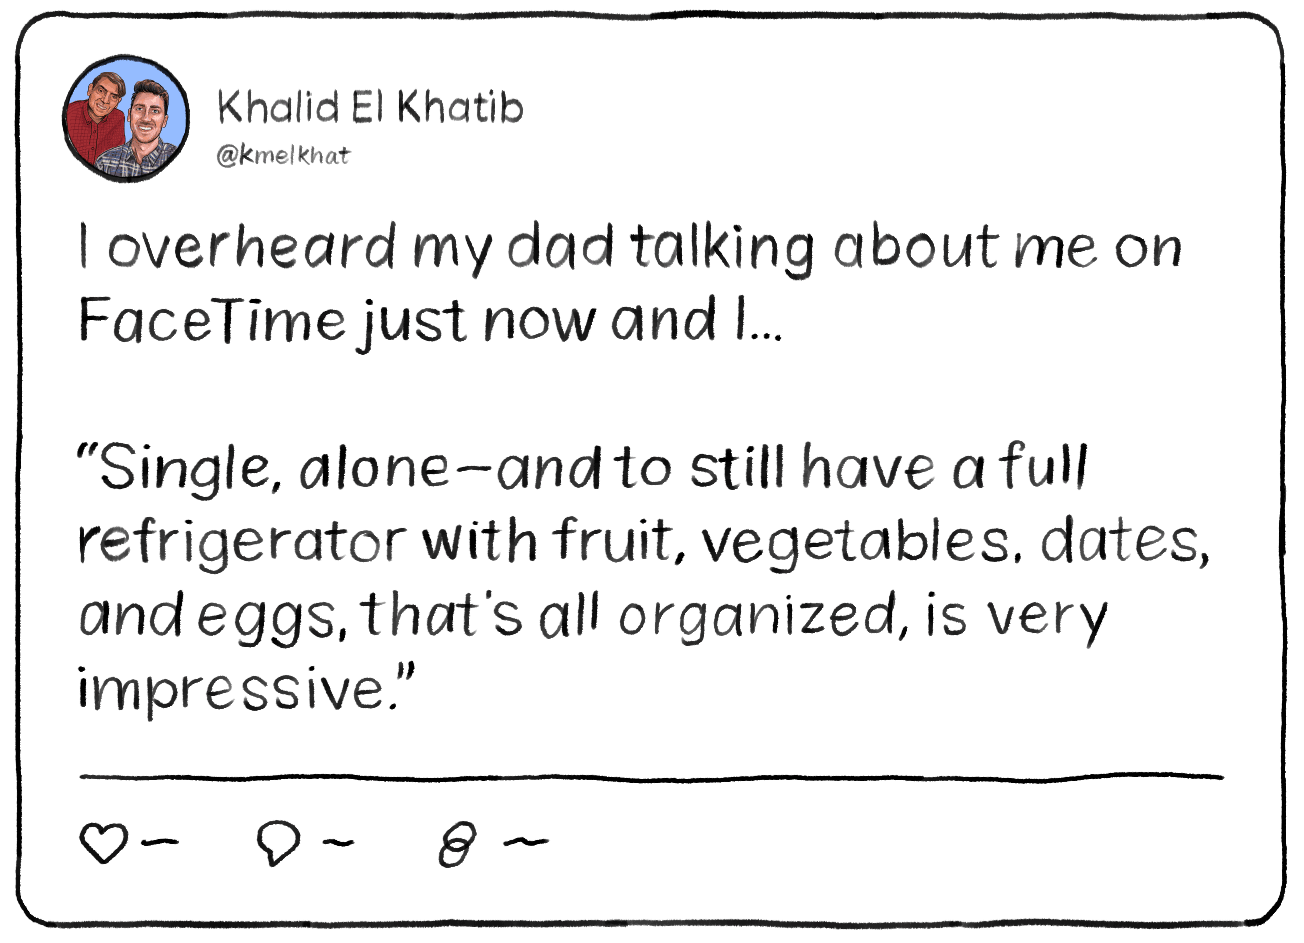 A tweet that reads: I overheard my dad talking about me on FaceTime just now and I... 

“Single, alone—and to still have a full refrigerator with fruit, vegetables, dates, and eggs, that’s all organized, is very impressive.”